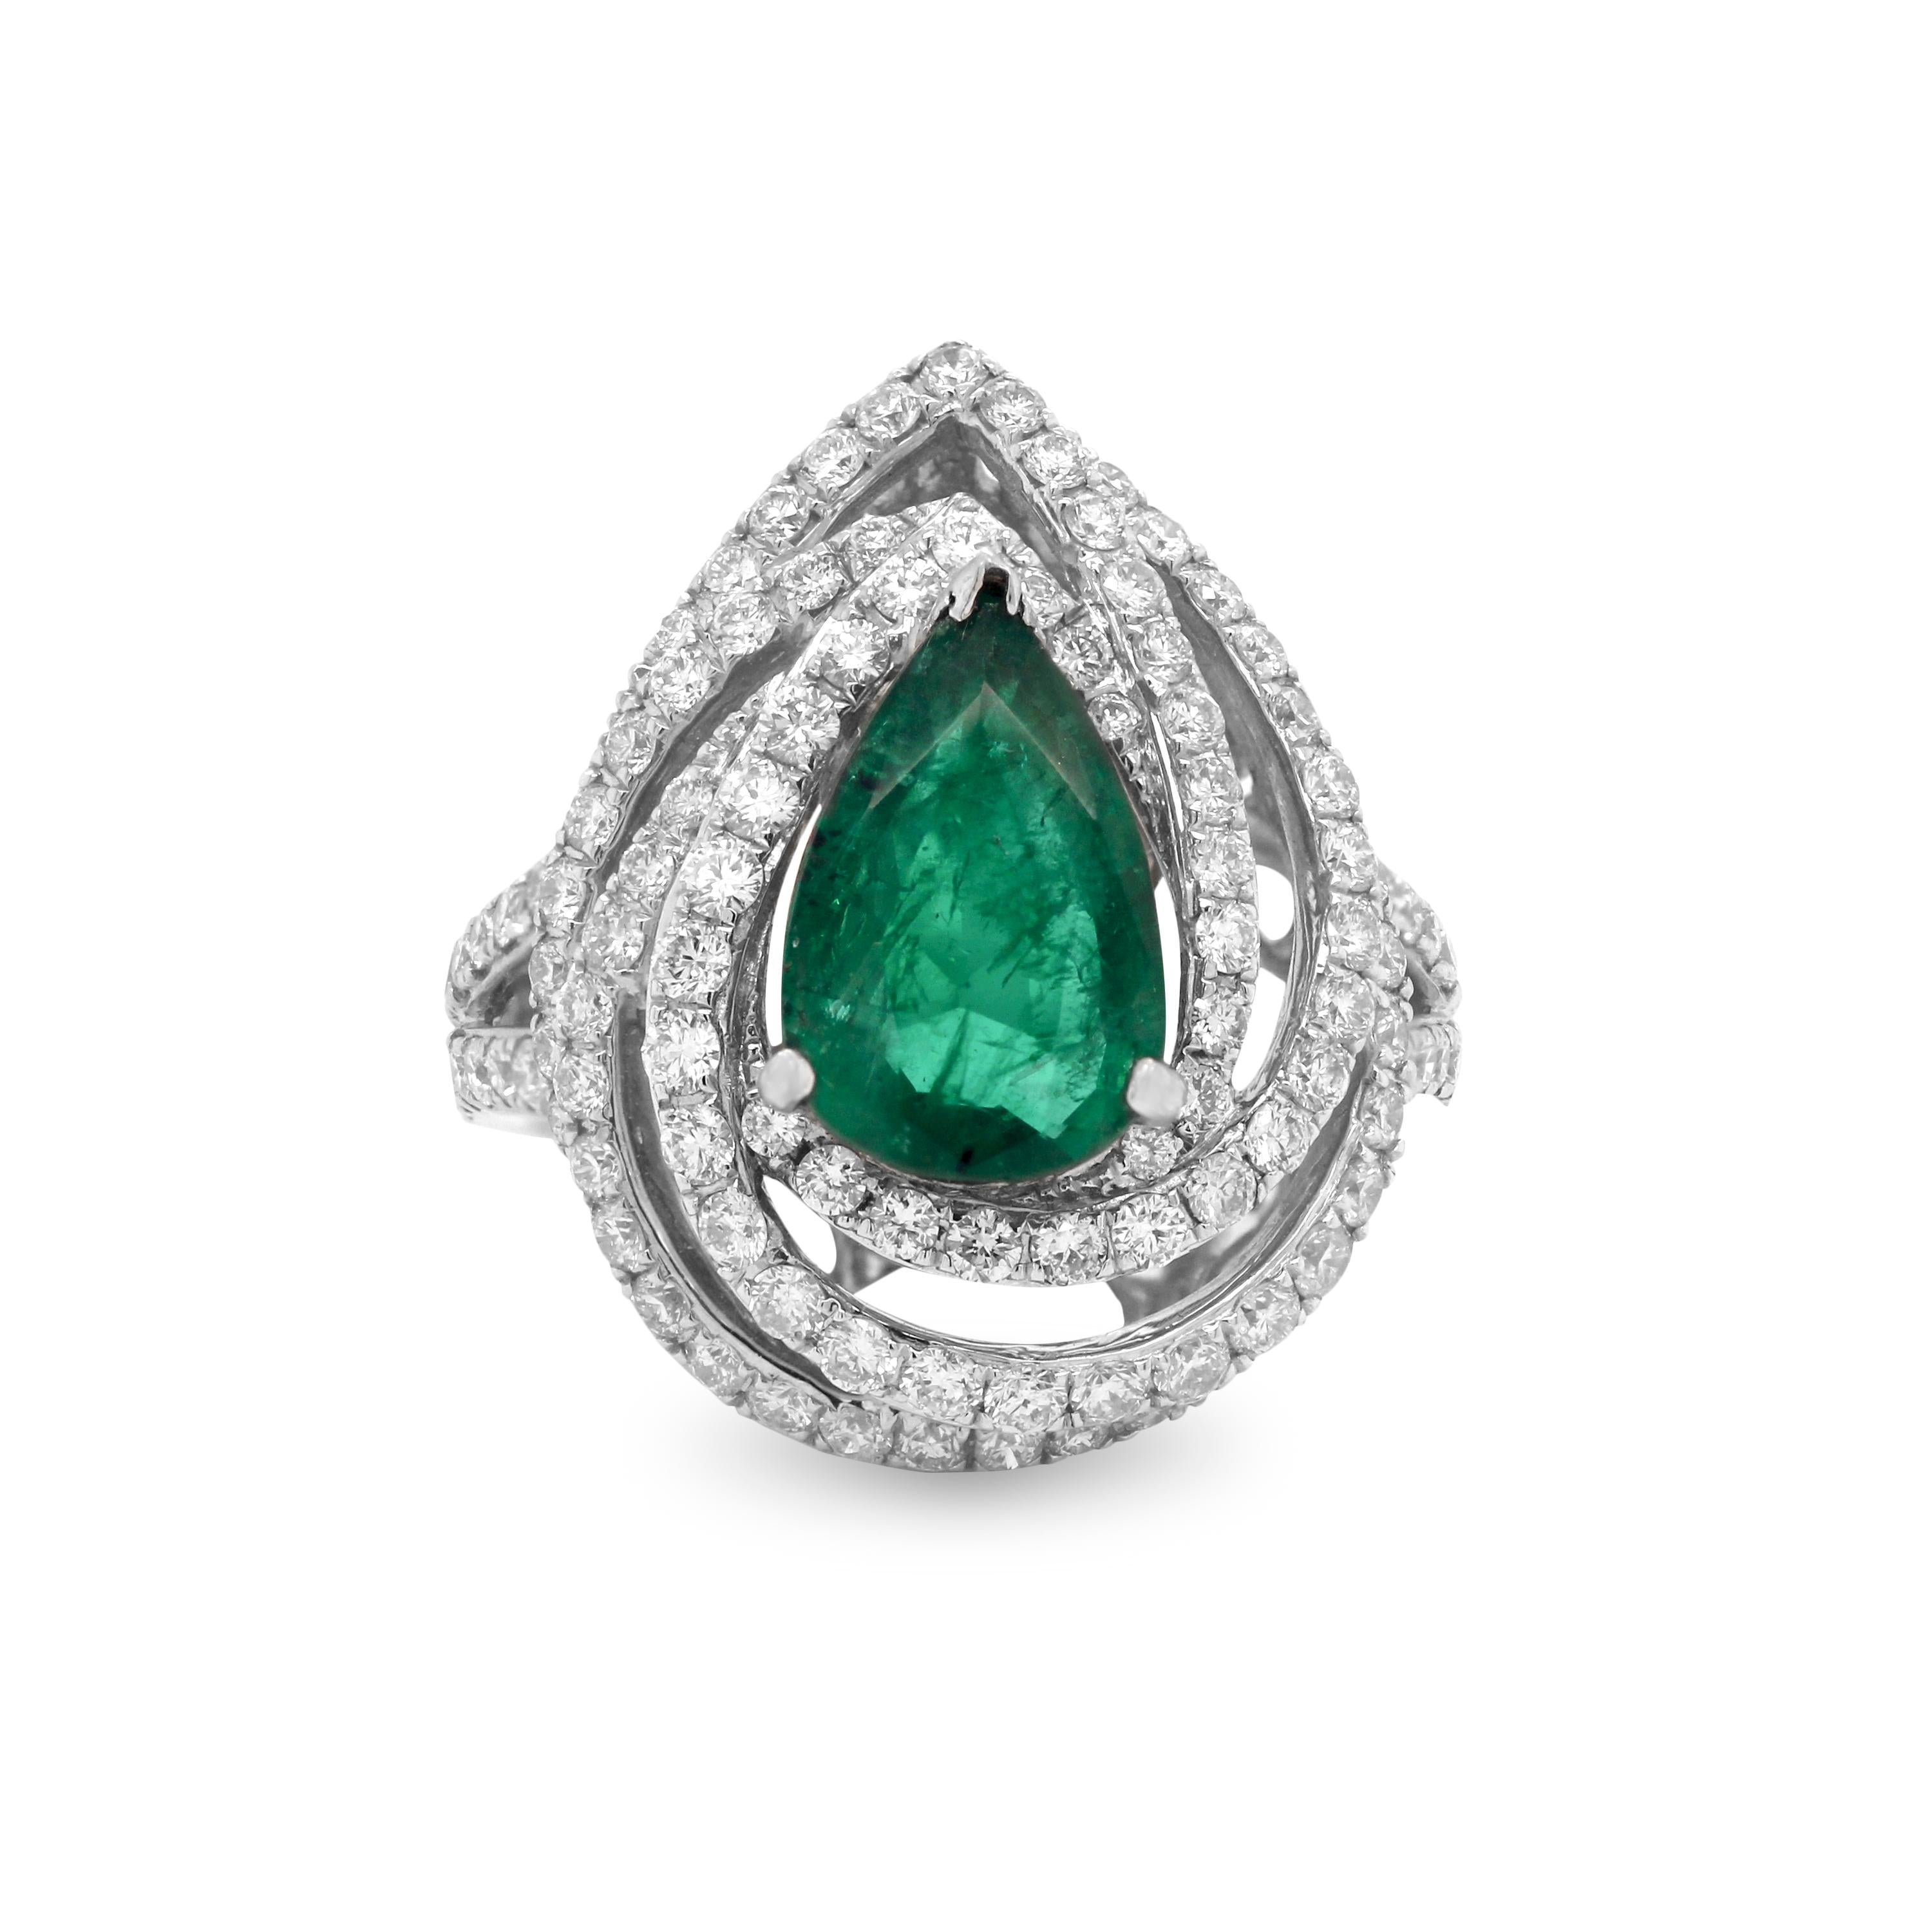 18k White Gold and Diamond Cocktail Ring with Pear Shape Emerald Center

2.27 carat Pear Shape Emerald center. Emerald is Zambian origin. 

2.00 carat G color, VS clarity diamonds

23mm face width. 3mm band width.  

Size 7. Sizable by request.